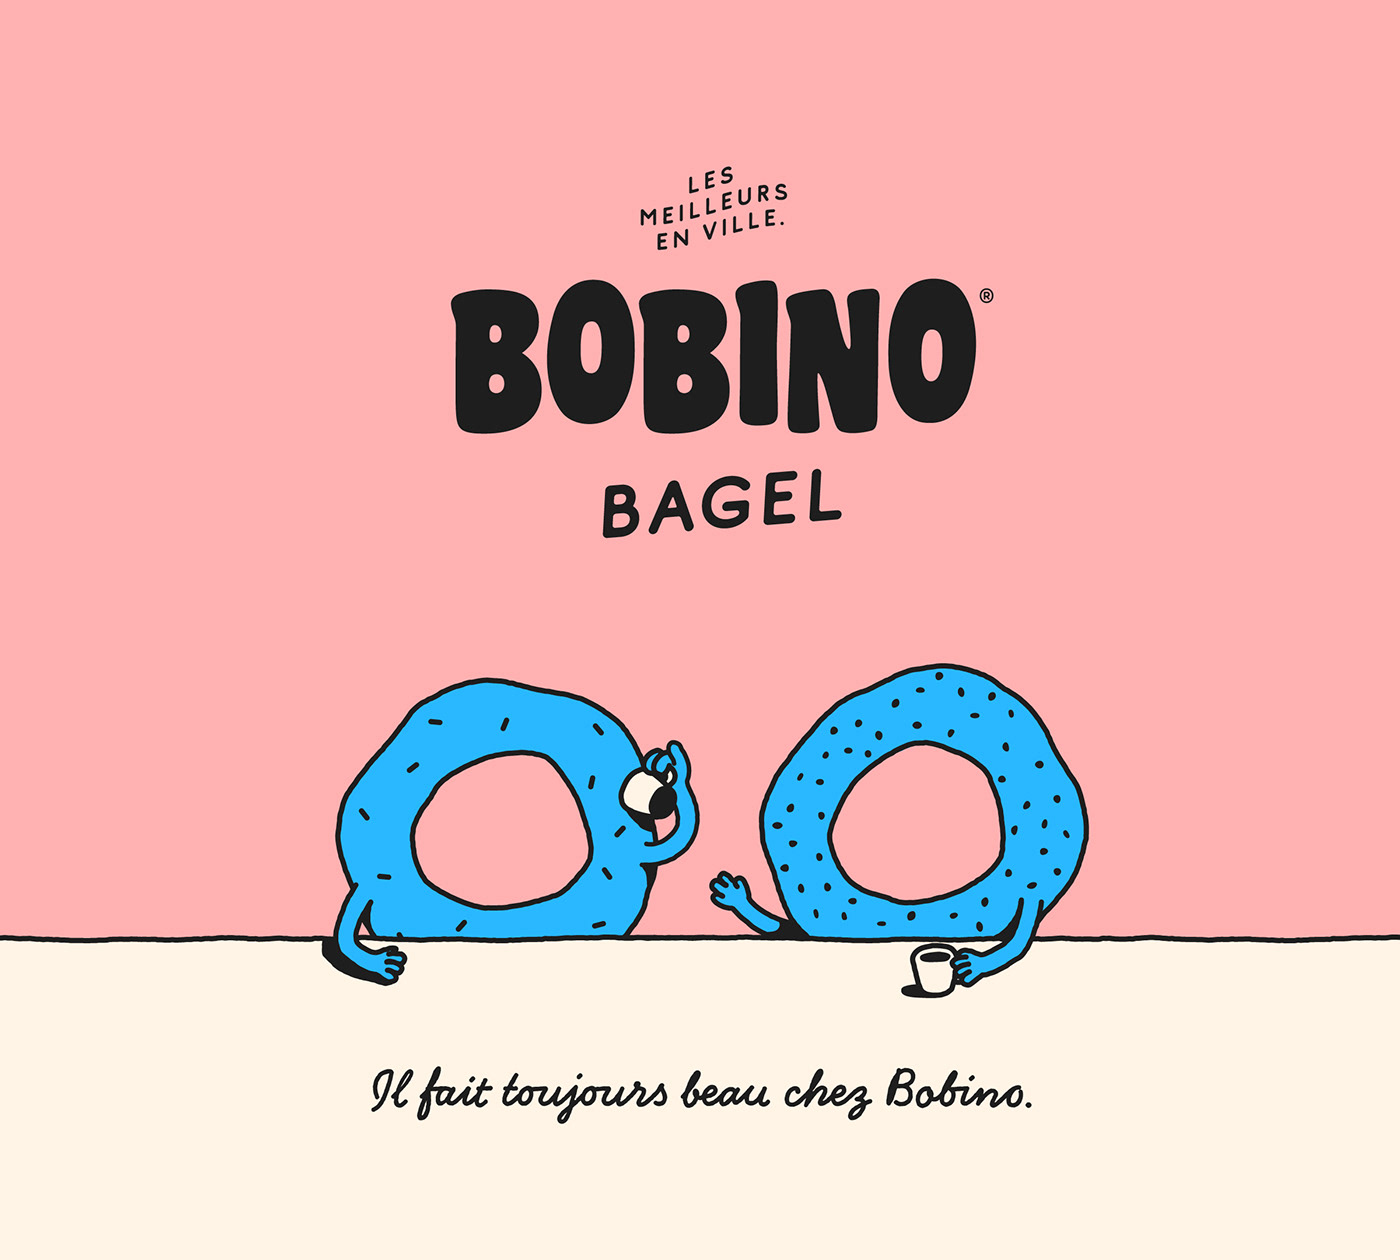 Cute Bagels drinking coffee in a bagel shop.
Fun and light logo design. 